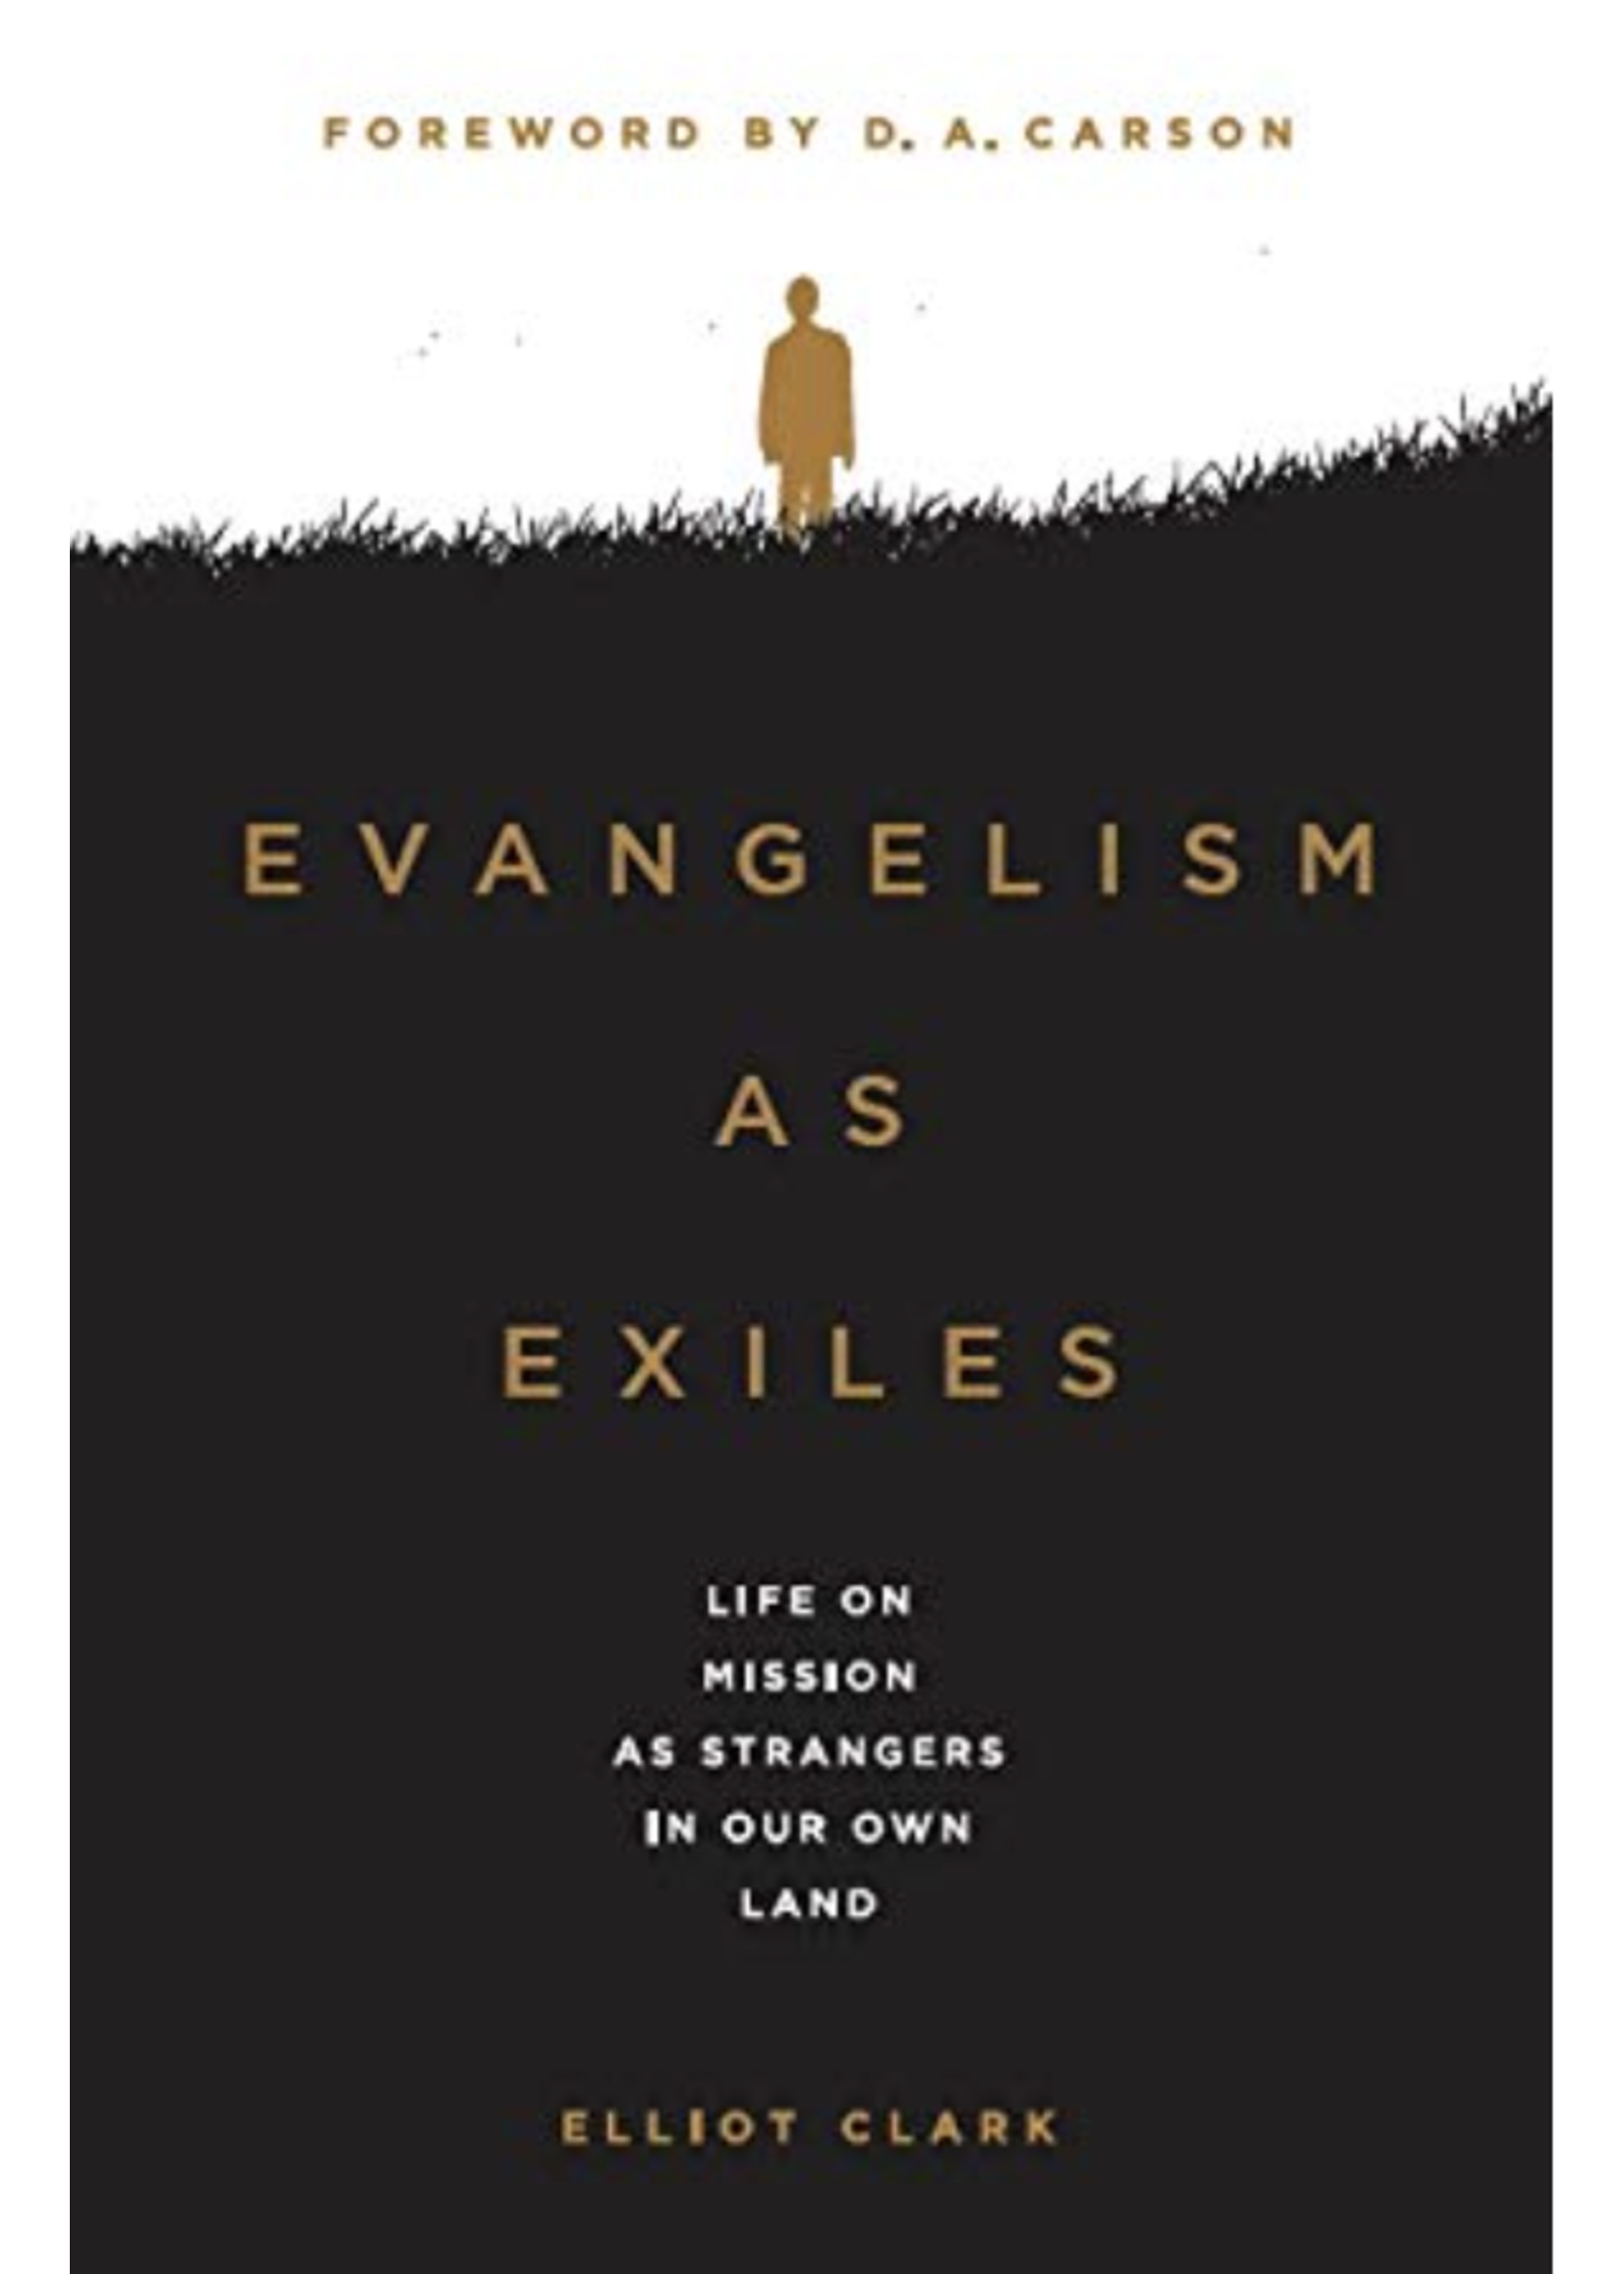 Evangelism as Exiles: Life on Mission as Strangers in our Own Land